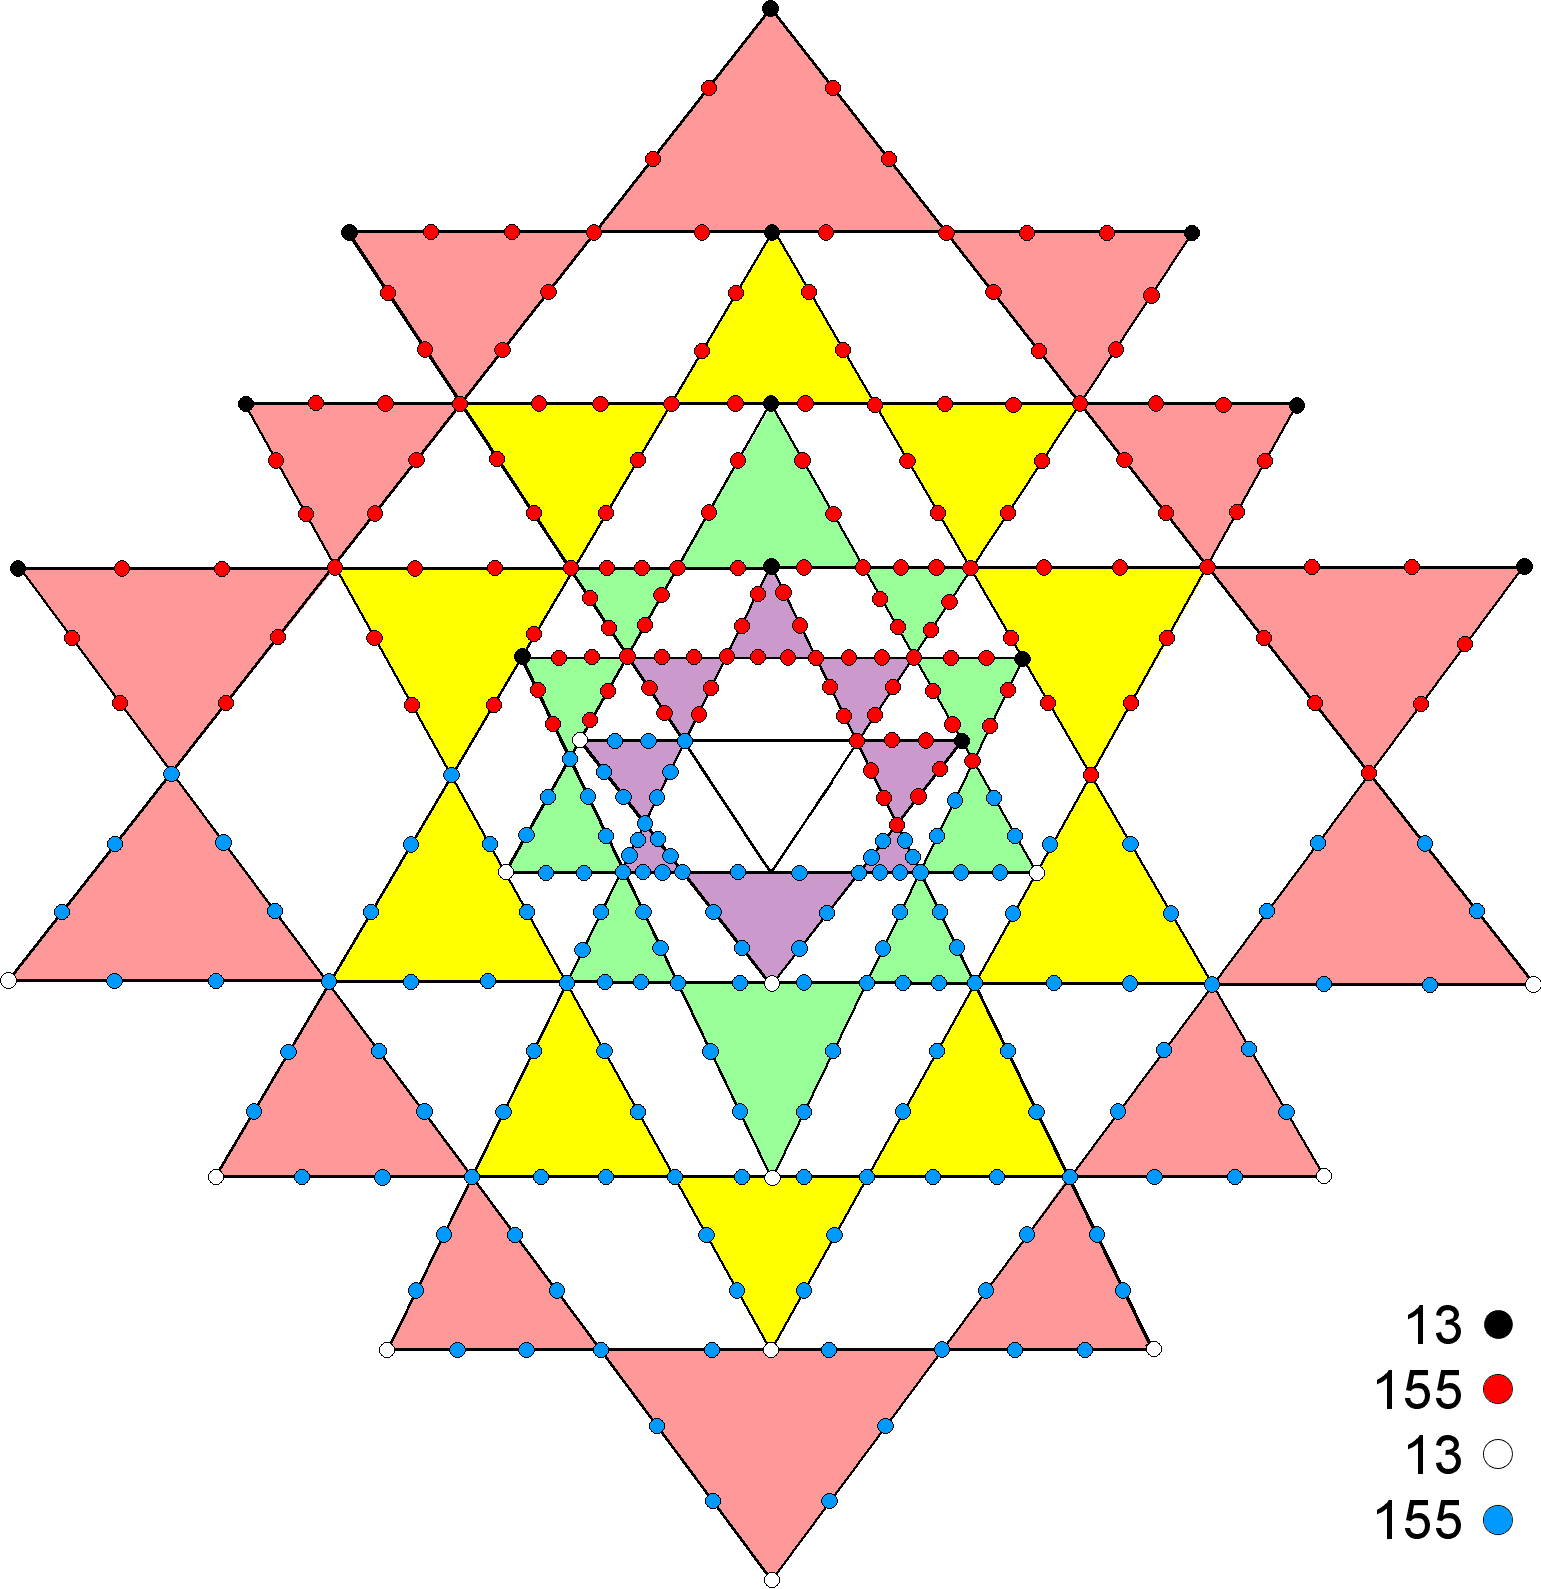 (13+155) yods on sides of triangles in each half of the Sri Yantra